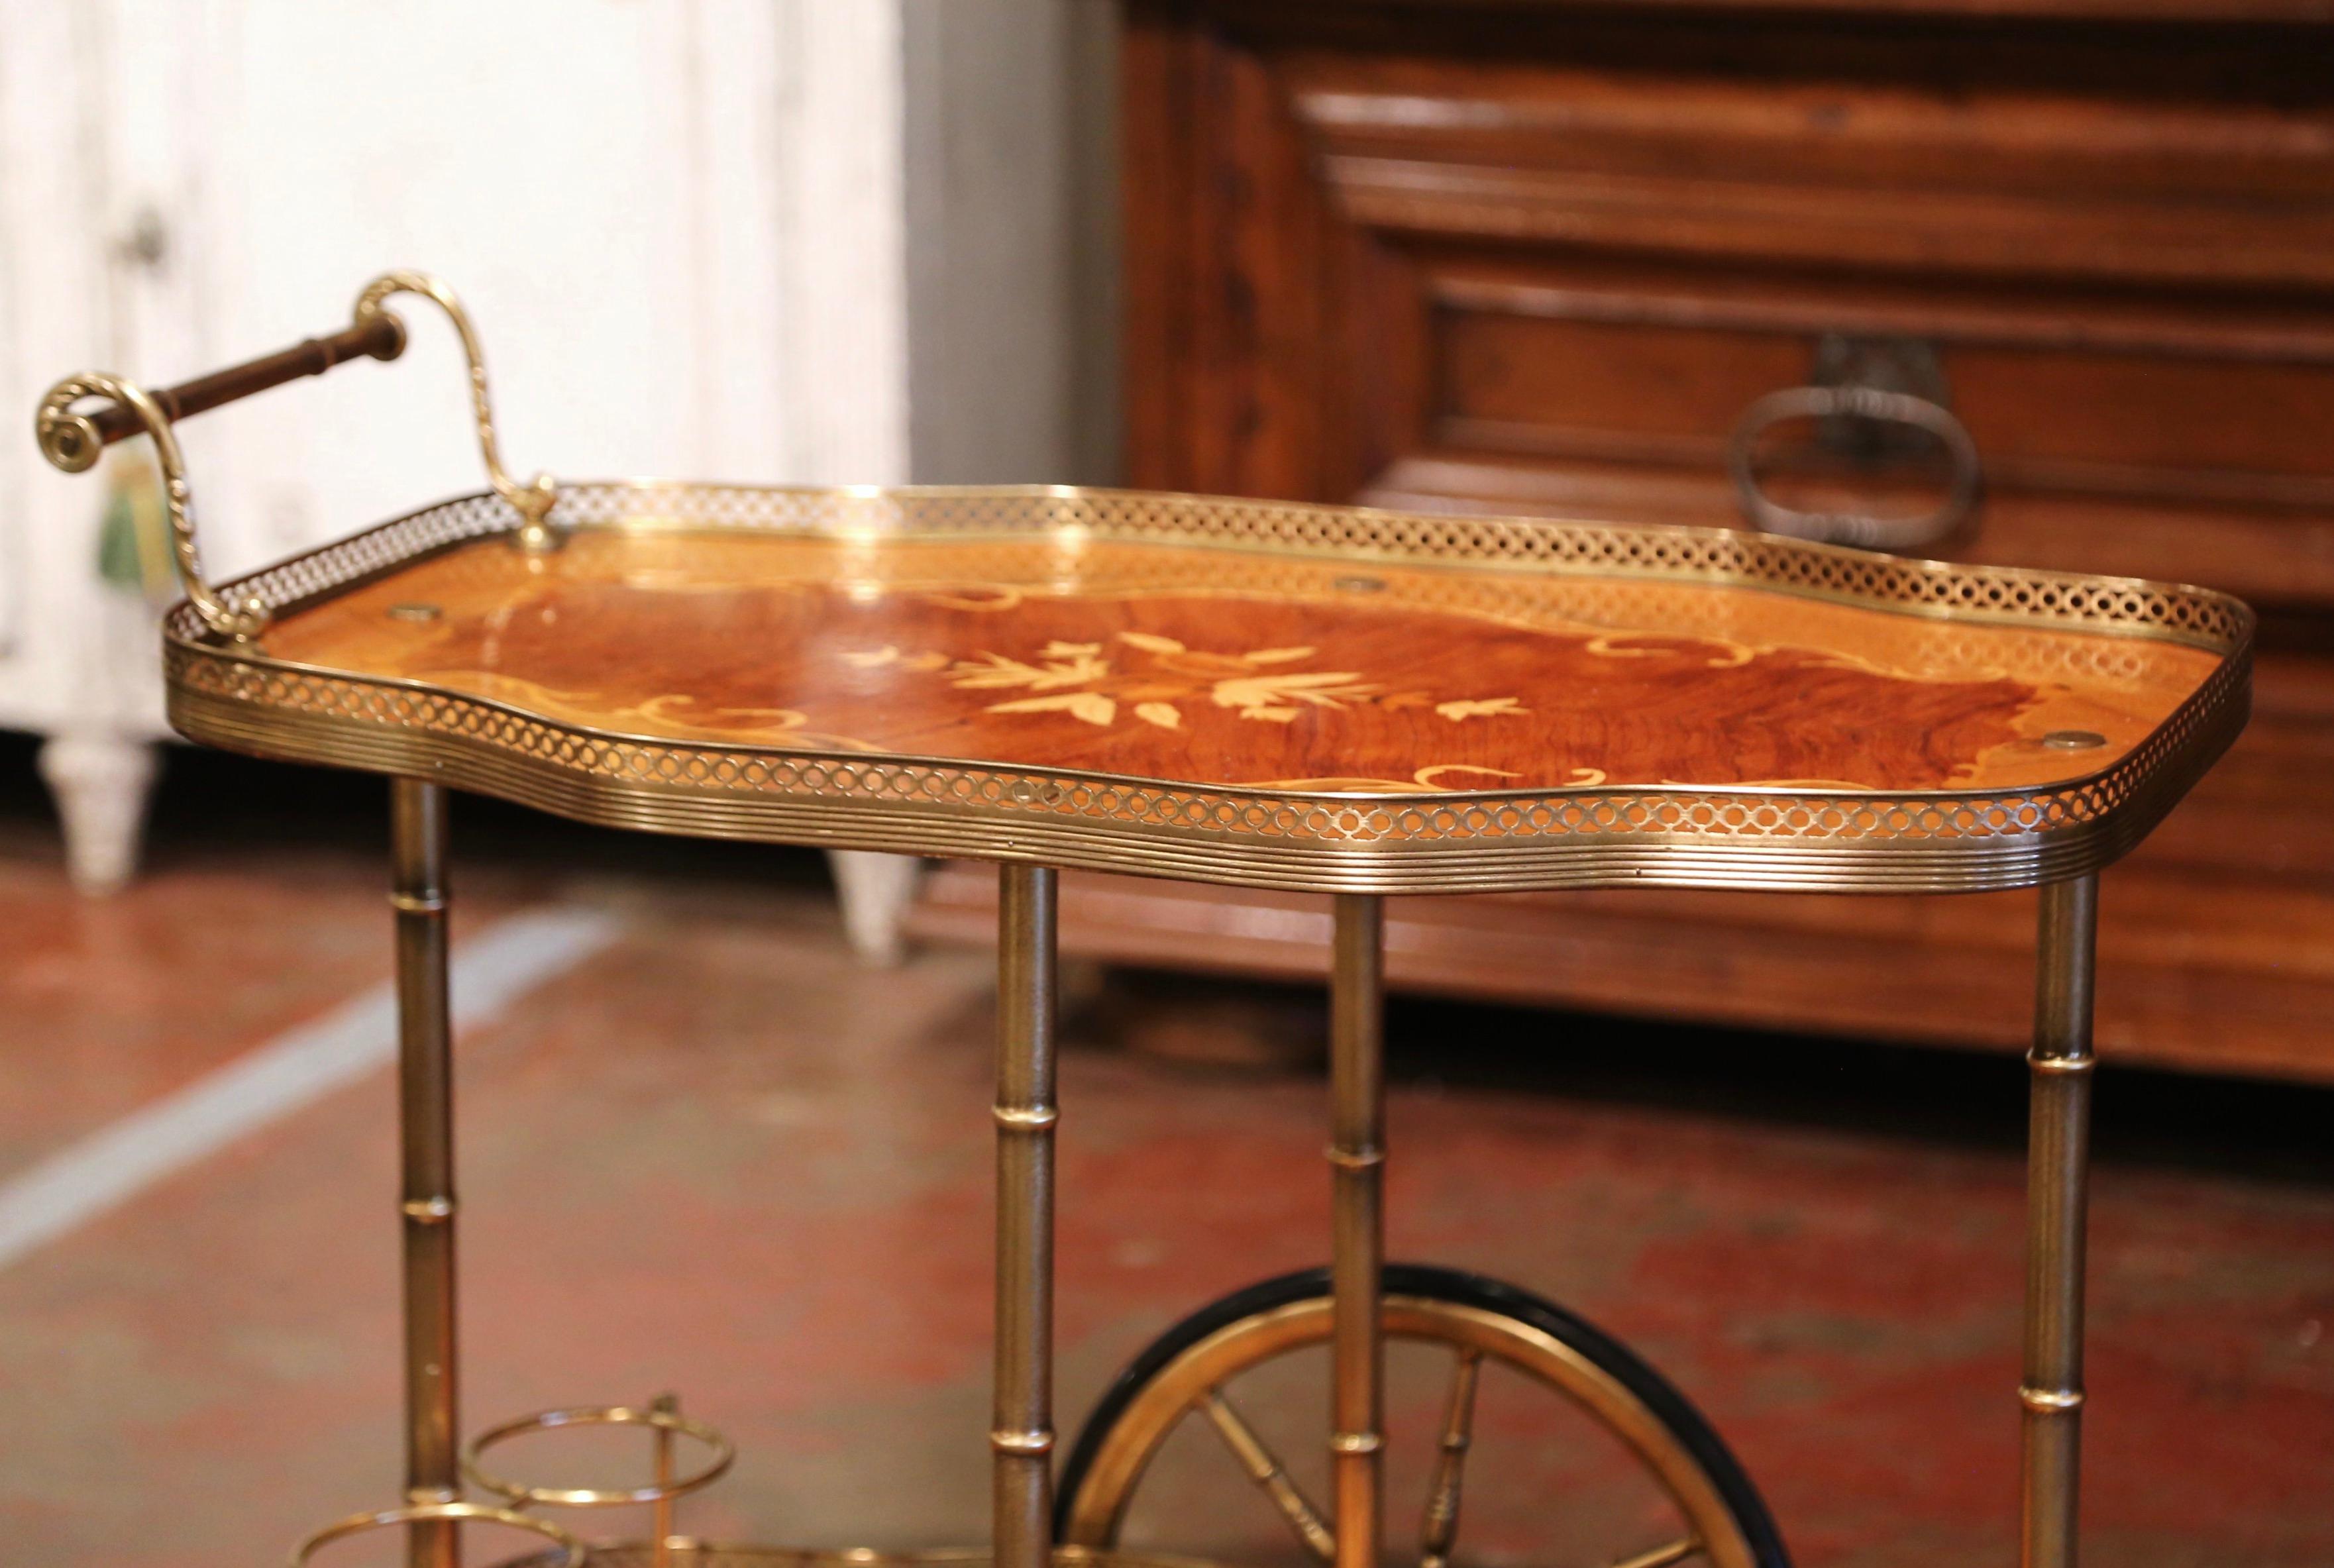 Hand-Crafted Mid-20th Century French Rosewood and Brass Tea Cart with Marquetry Inlaid Motifs